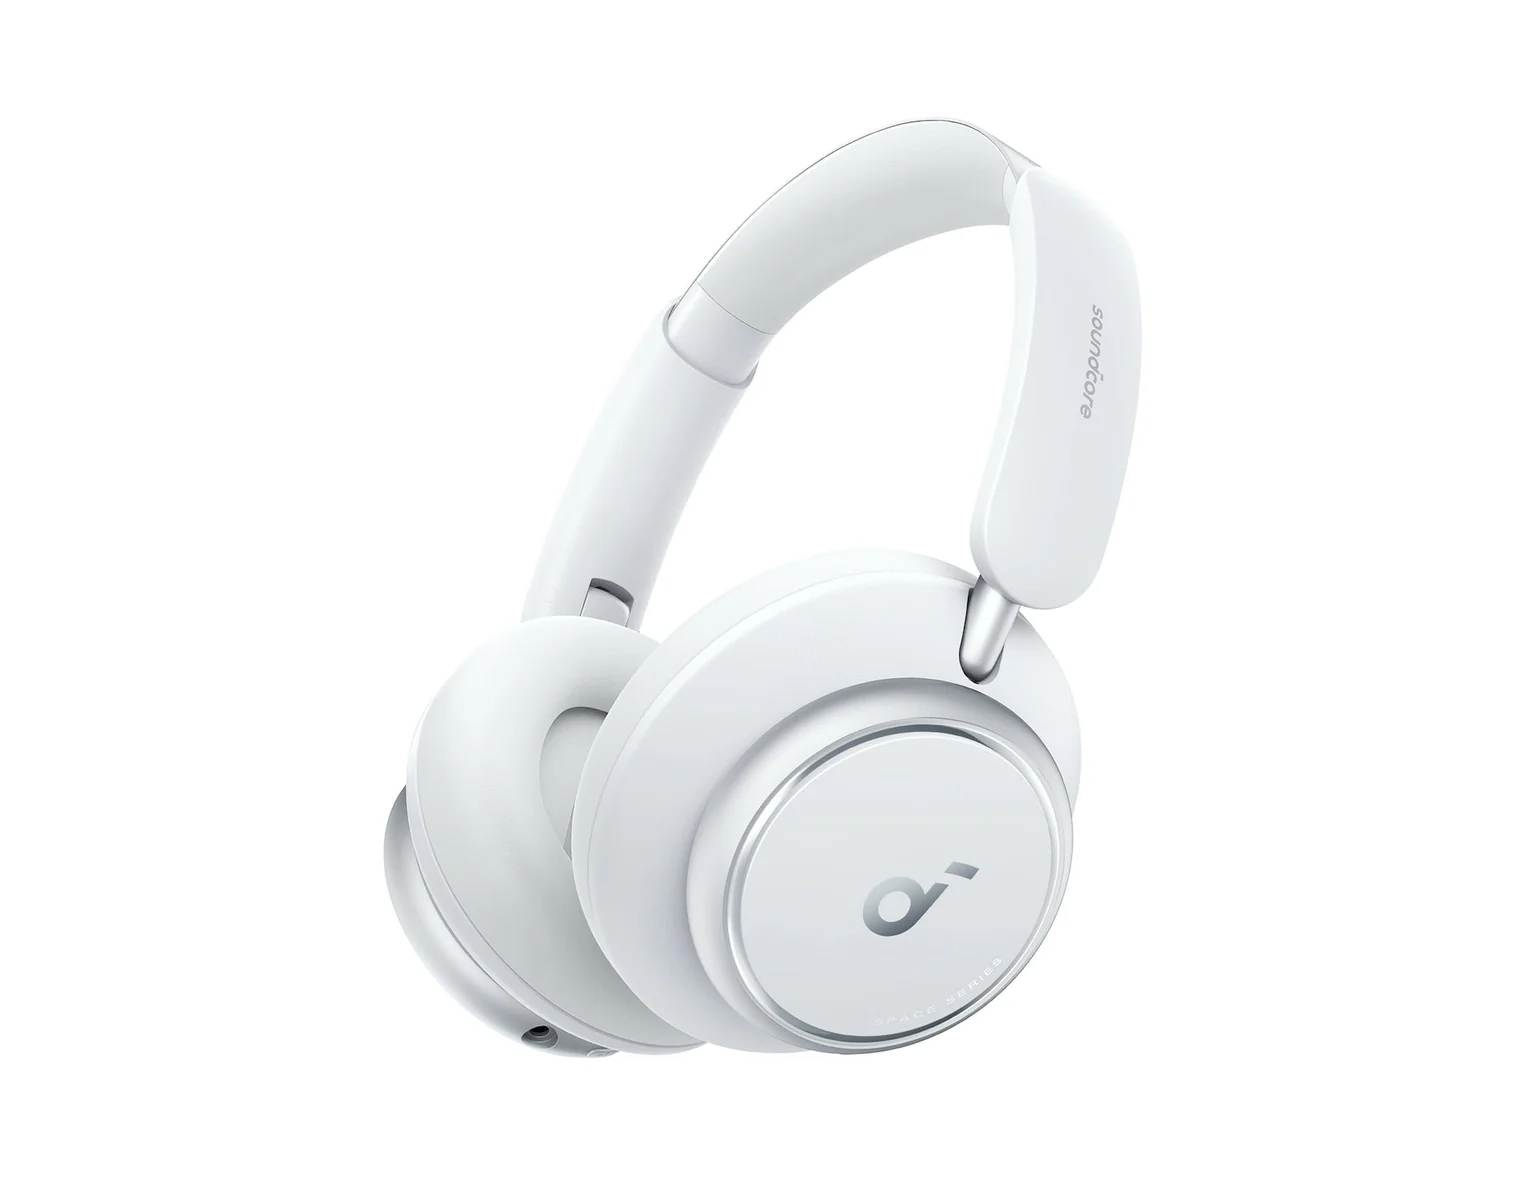 Win a free pair of Soundcore Space Q45 headphones